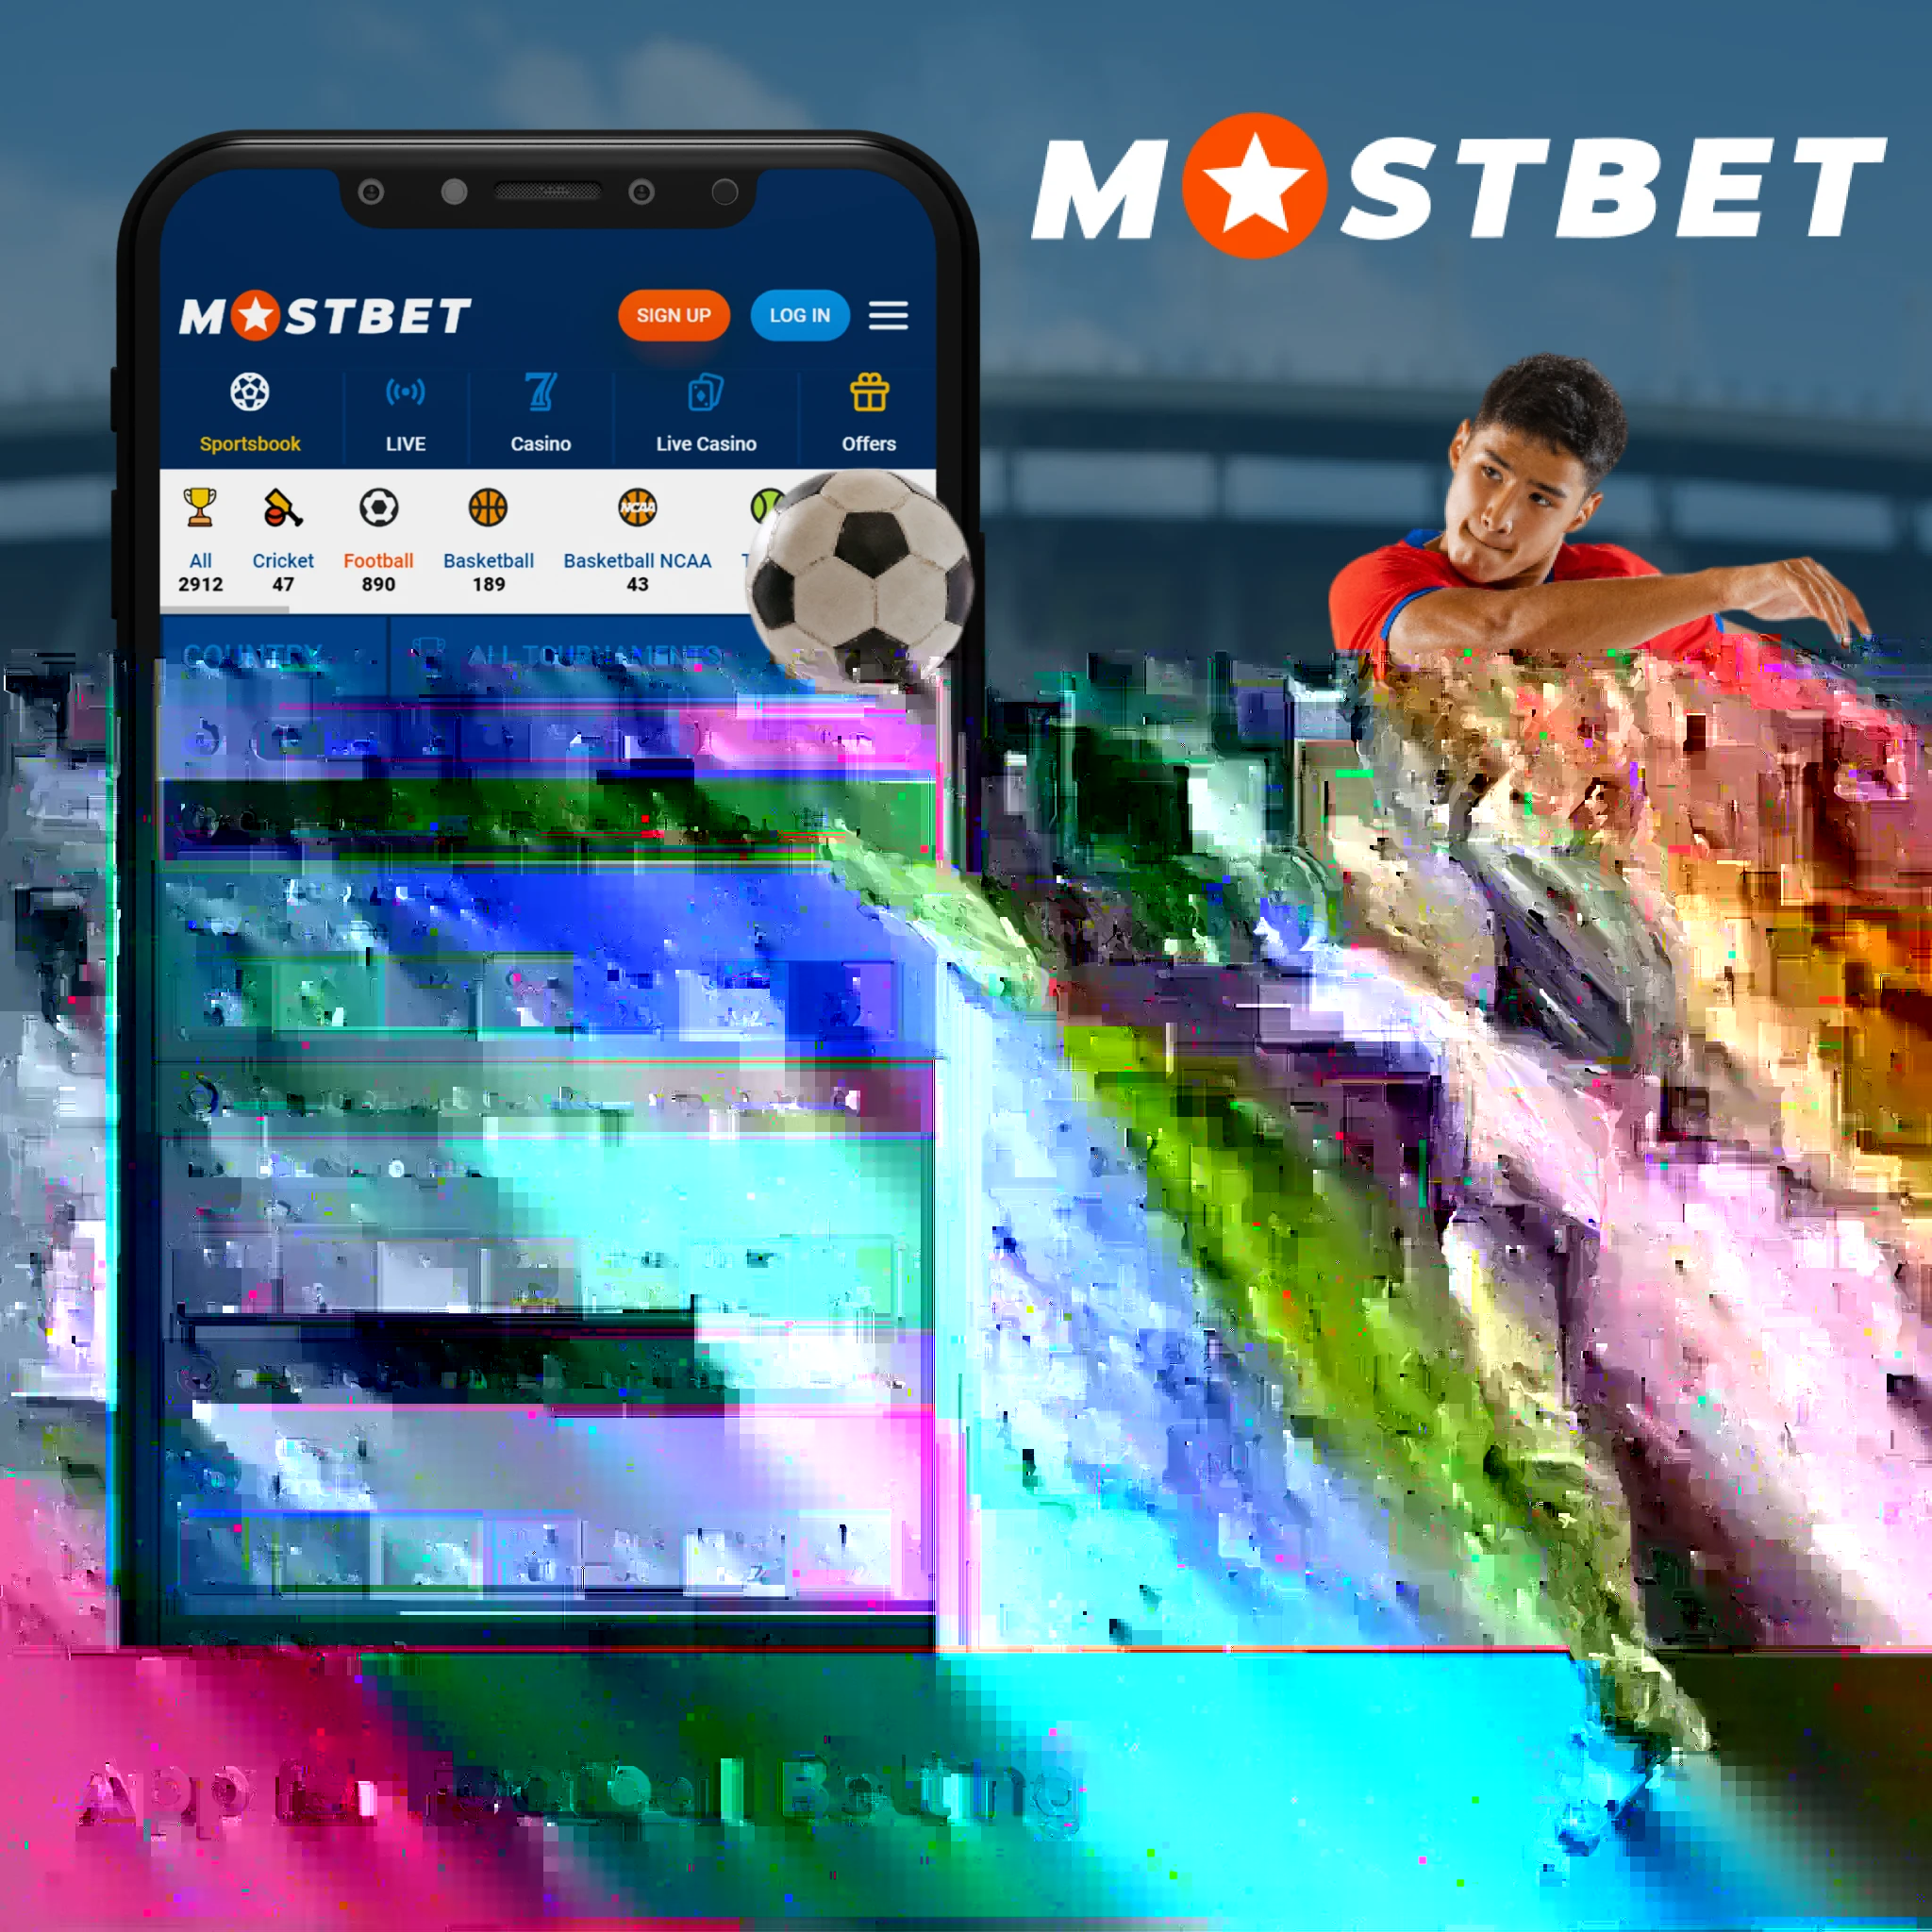 Experience the diverse football betting options and different features offered by Mostbet app.